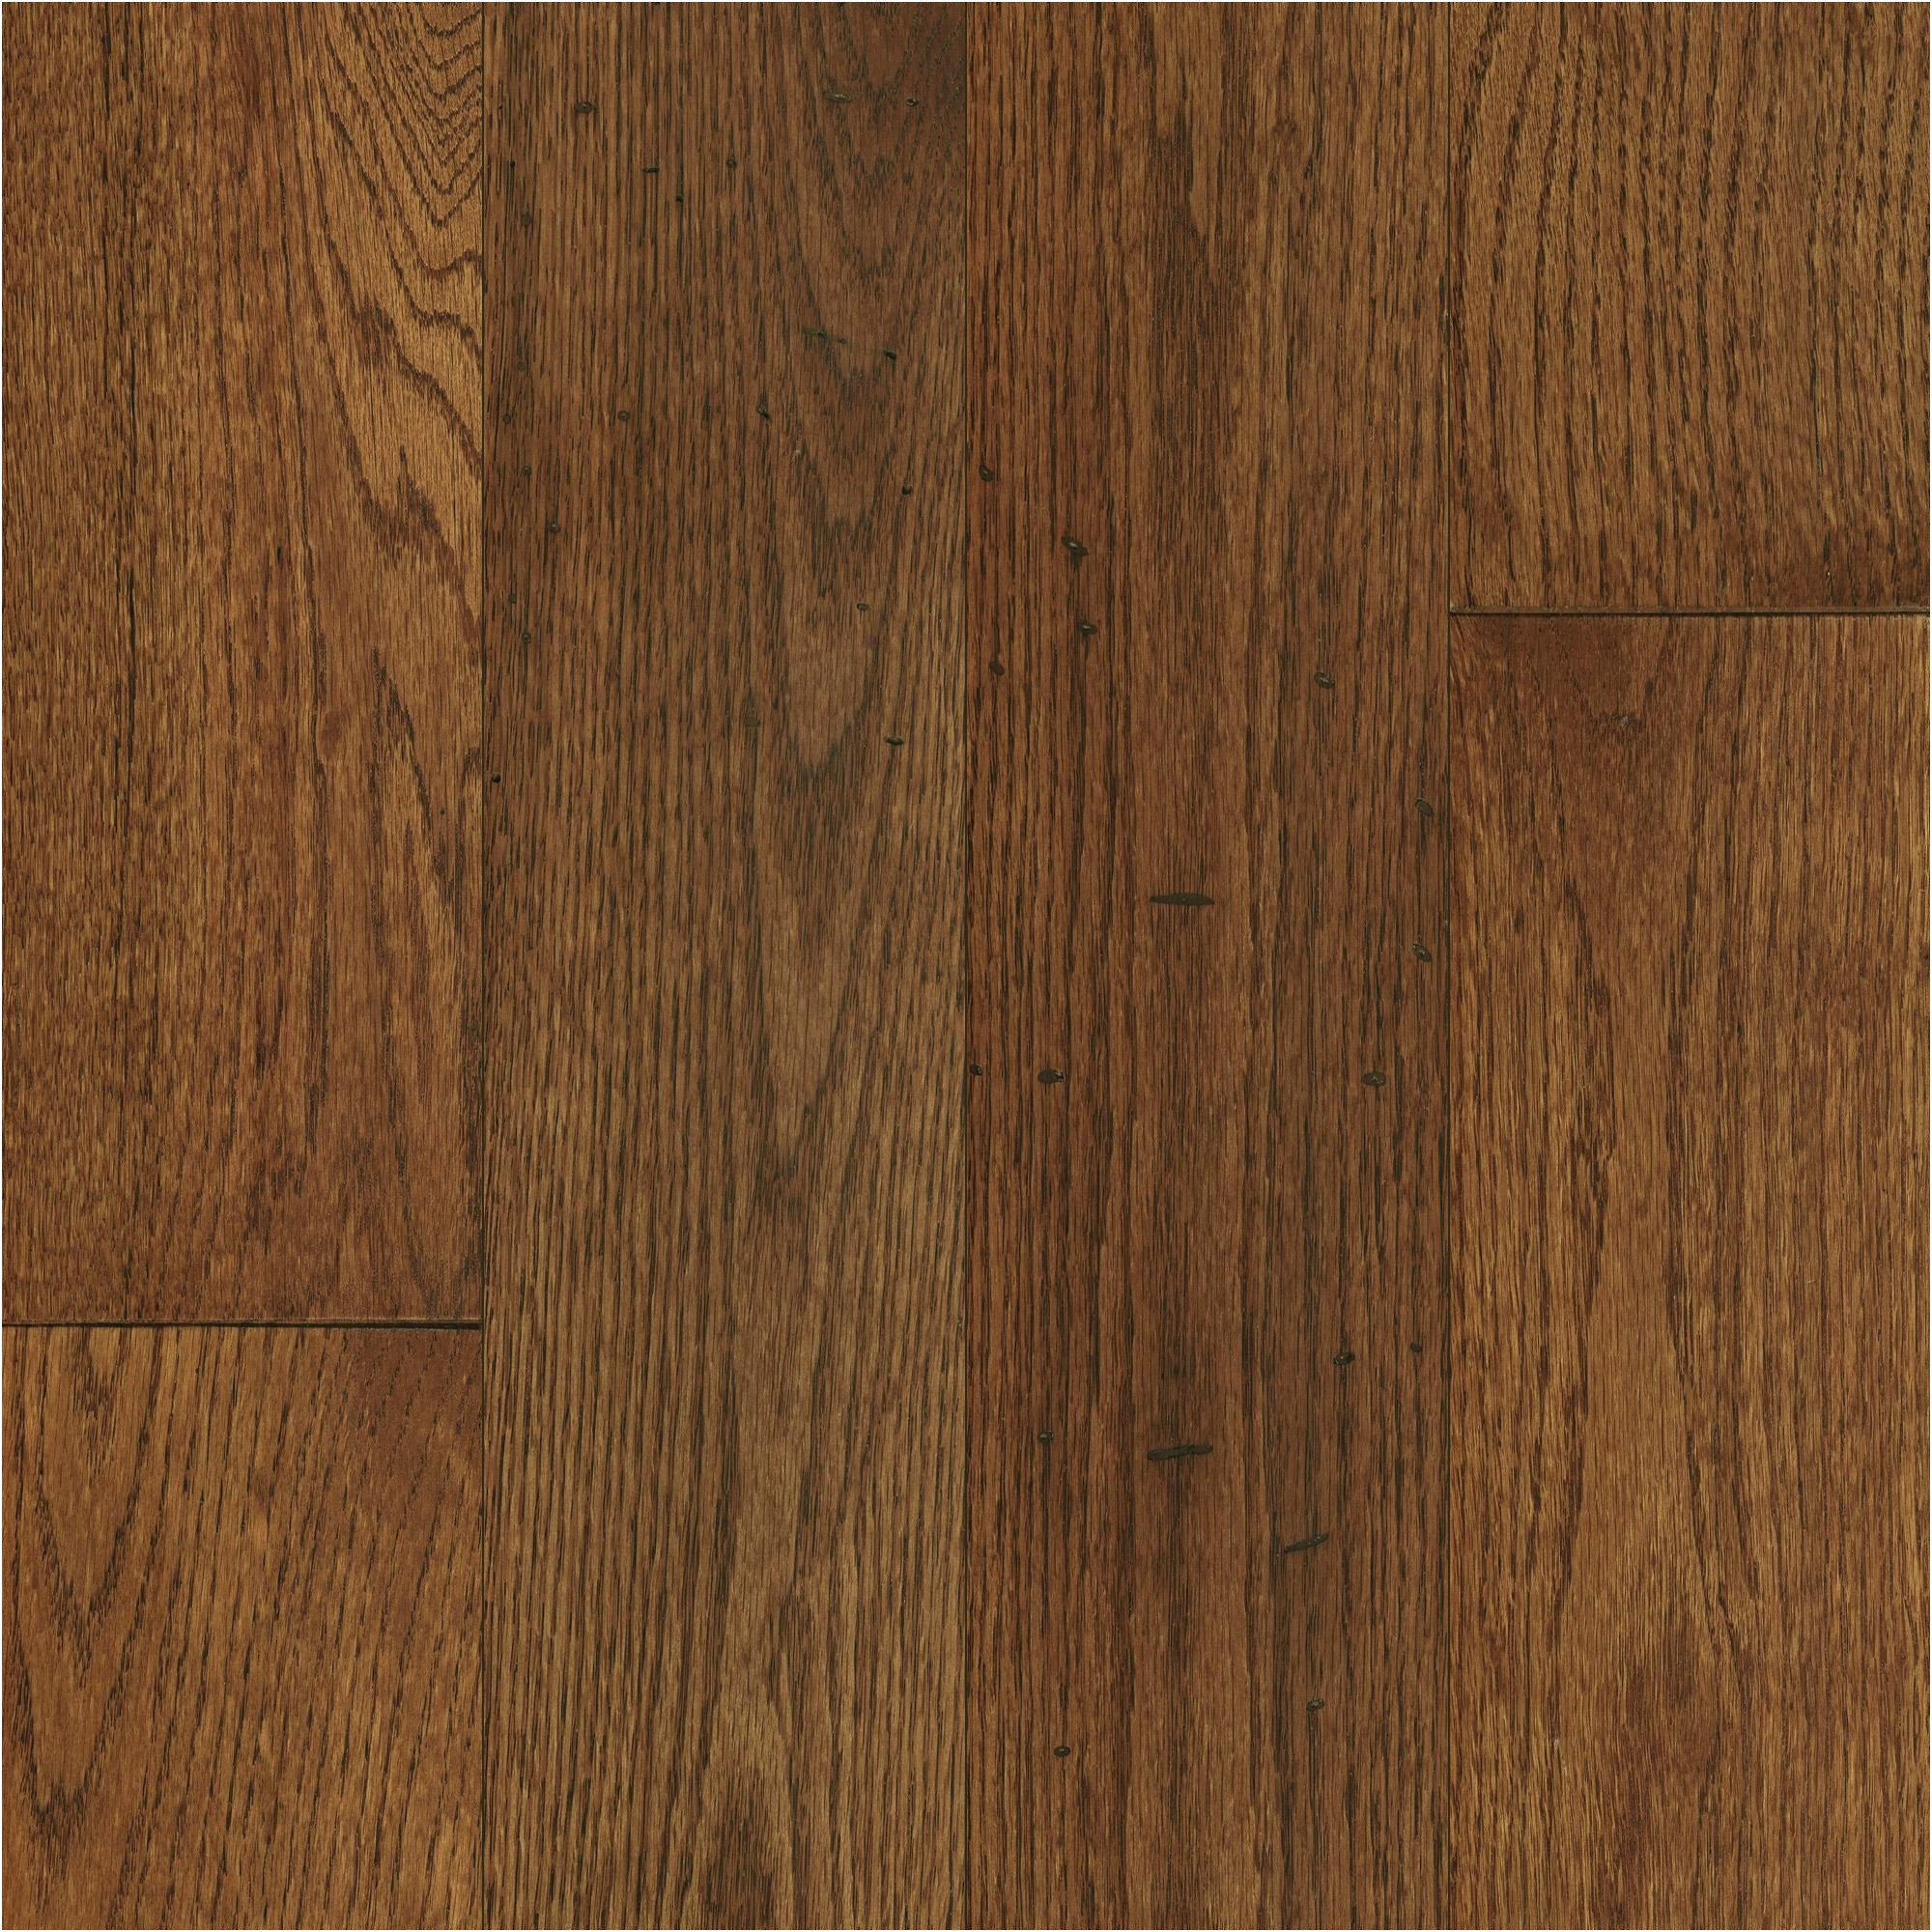 11 Famous Cost to Install Unfinished Hardwood Floors 2024 free download cost to install unfinished hardwood floors of unfinished hardwood flooring for sale flooring design pertaining to unfinished hardwood flooring for sale lovely hardwood floor design wood floo